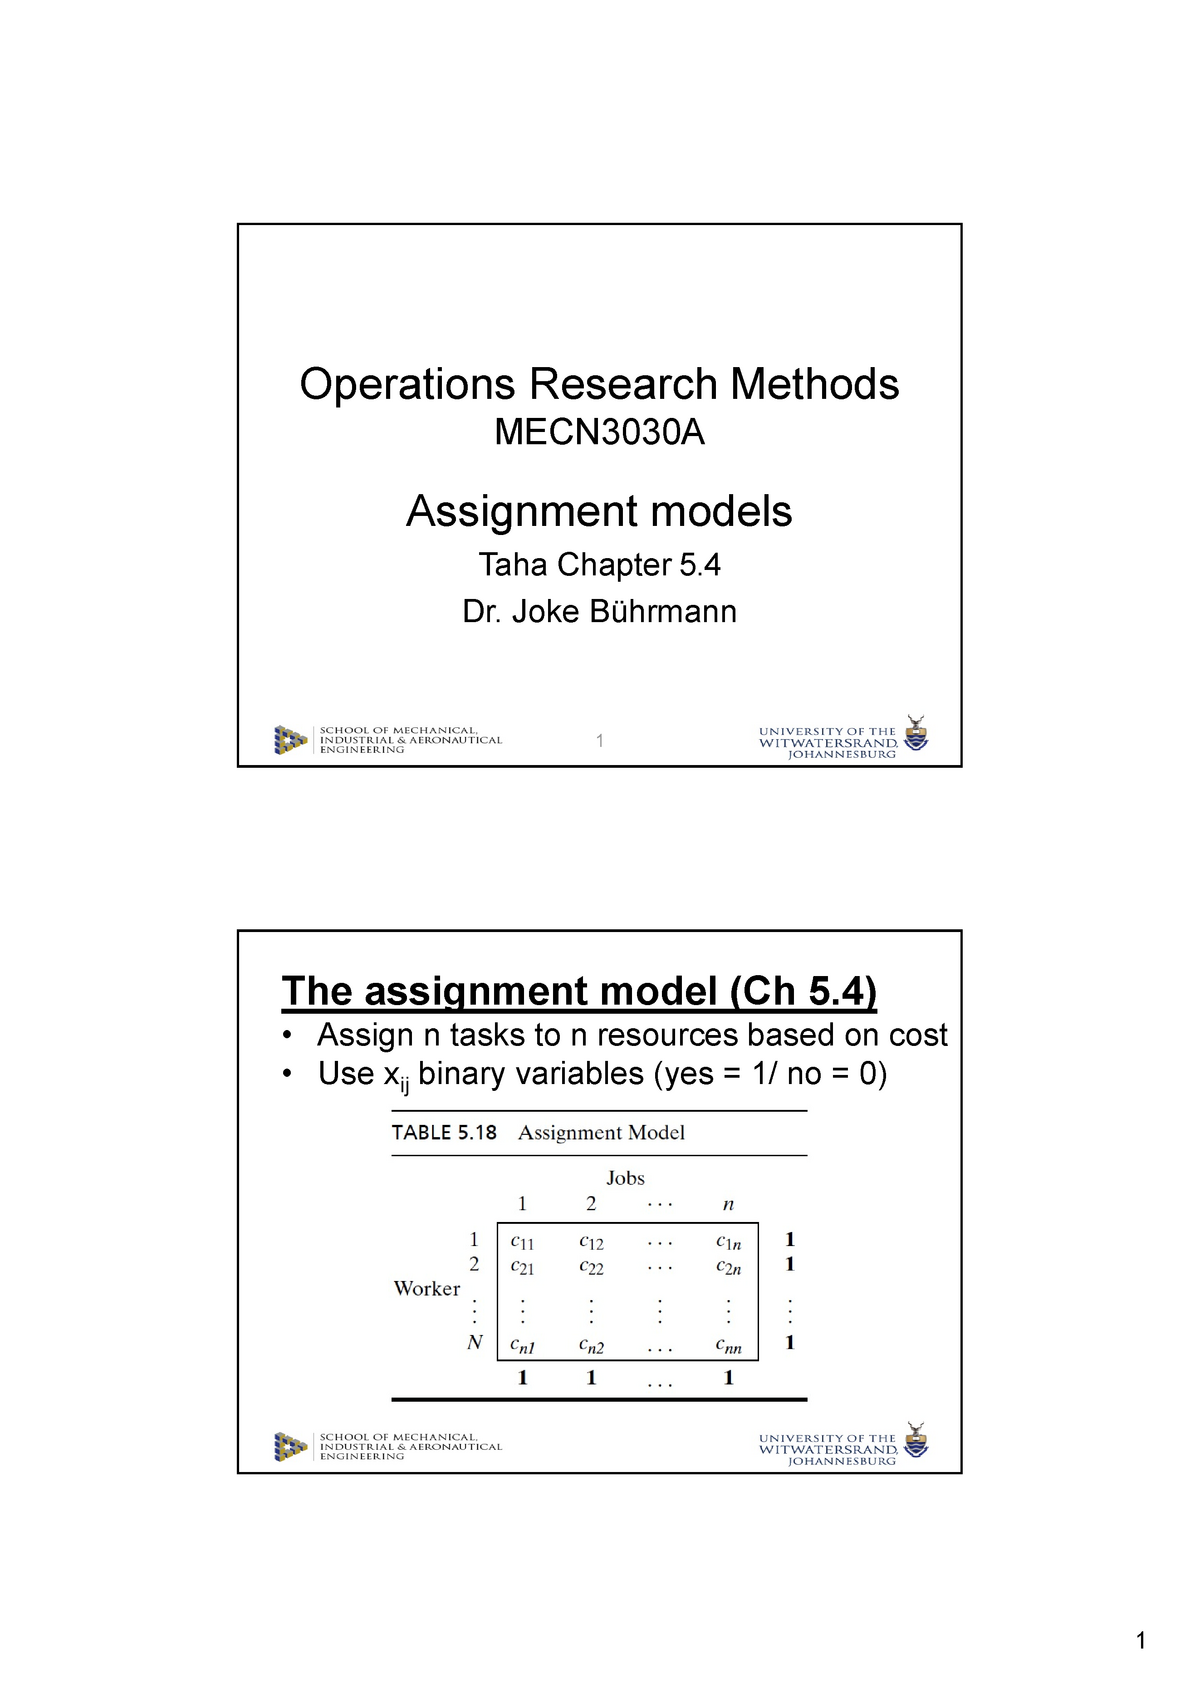 assignment model operations research